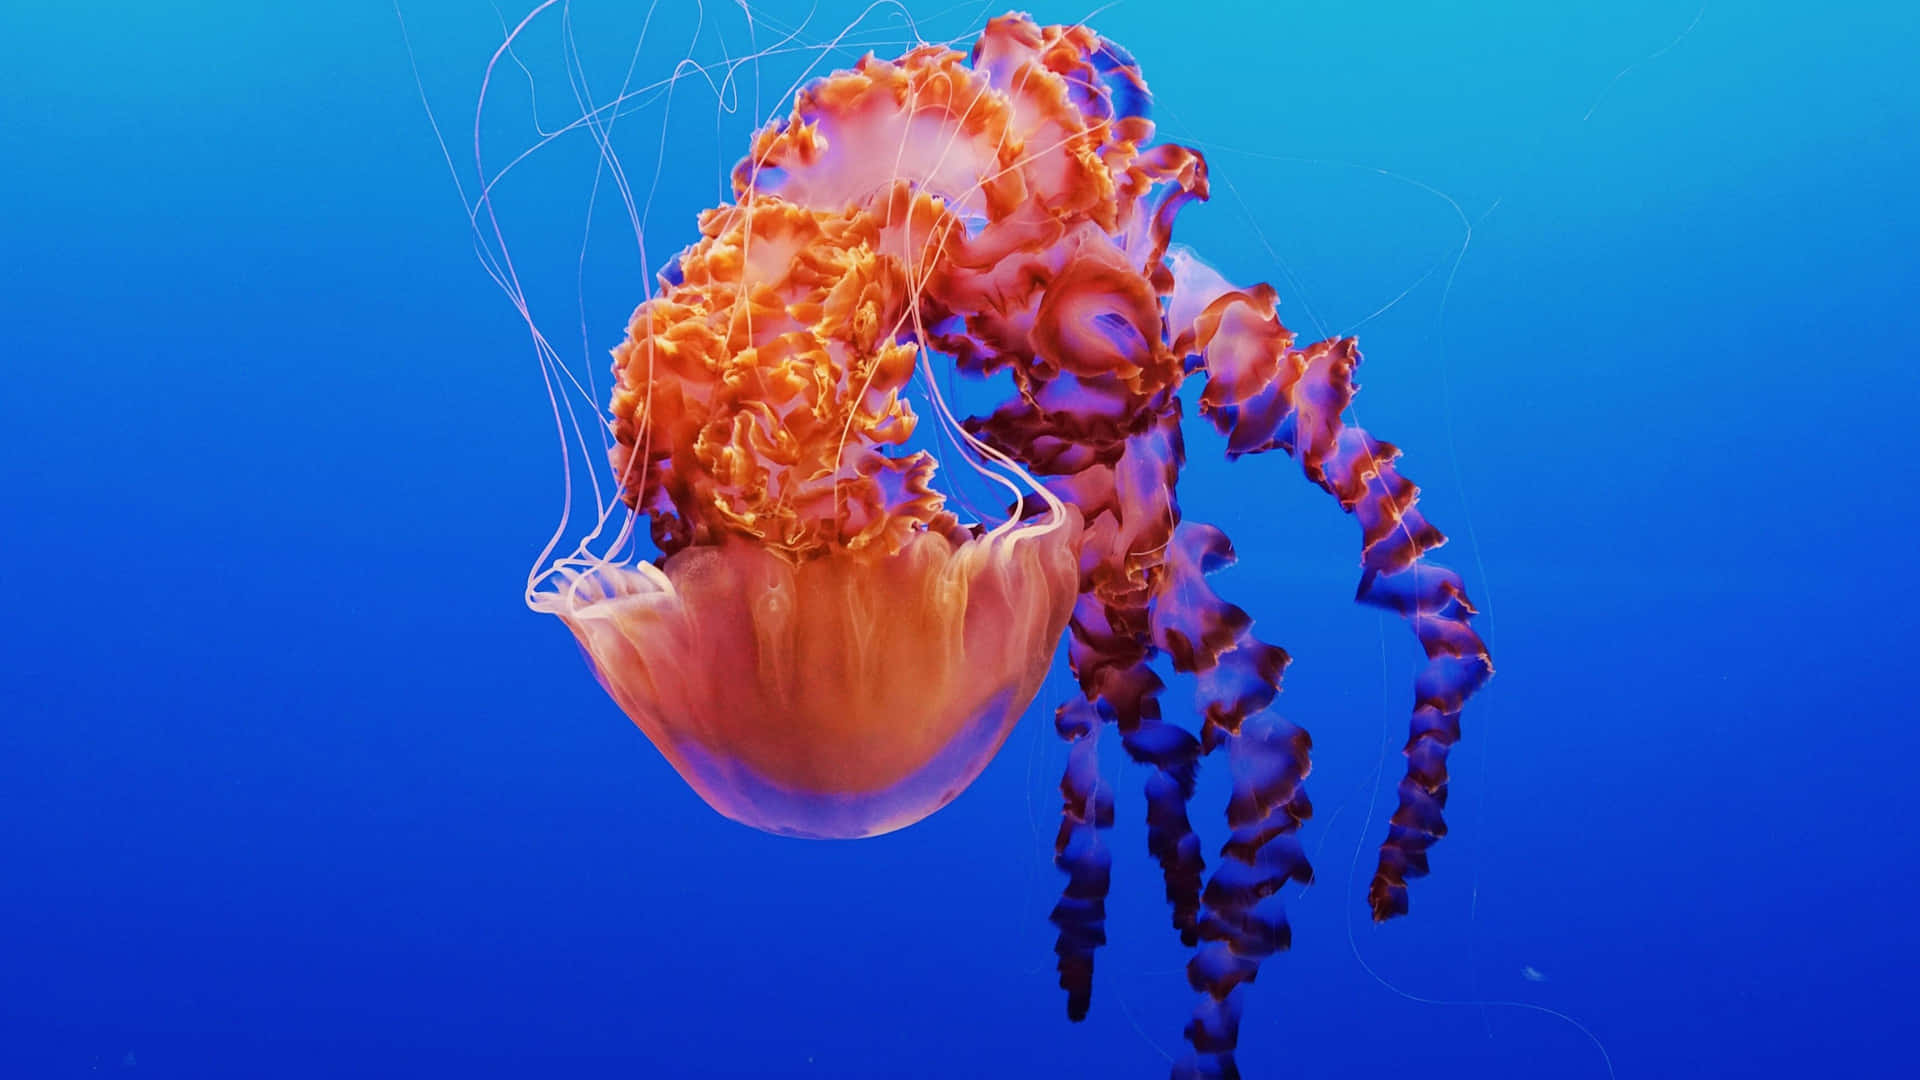 Submerge in the world of 4K Jellyfish Wallpaper